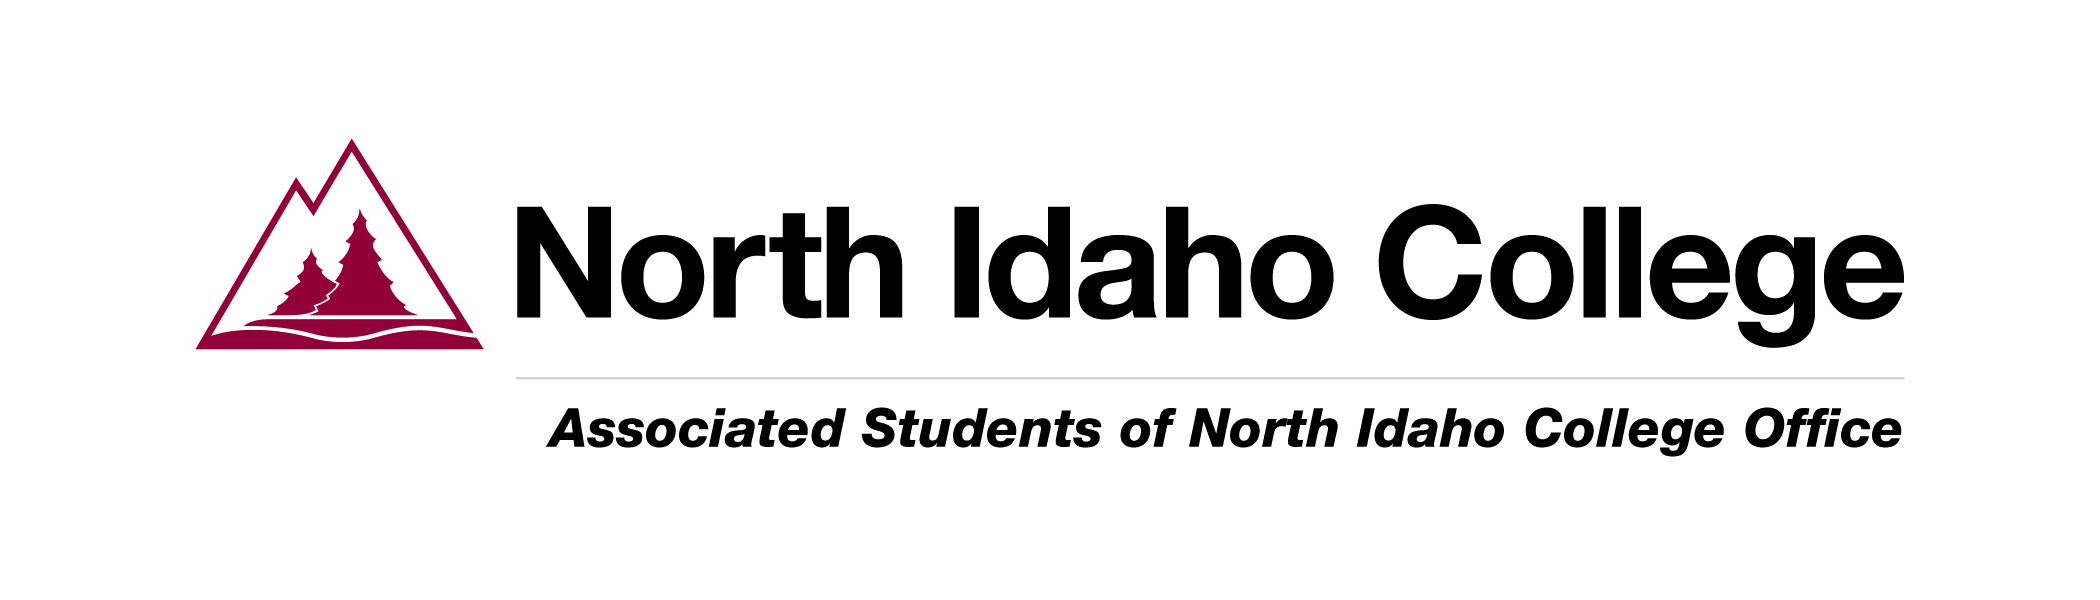 NIC Logo with Associated Students of North Idaho College Office and no address